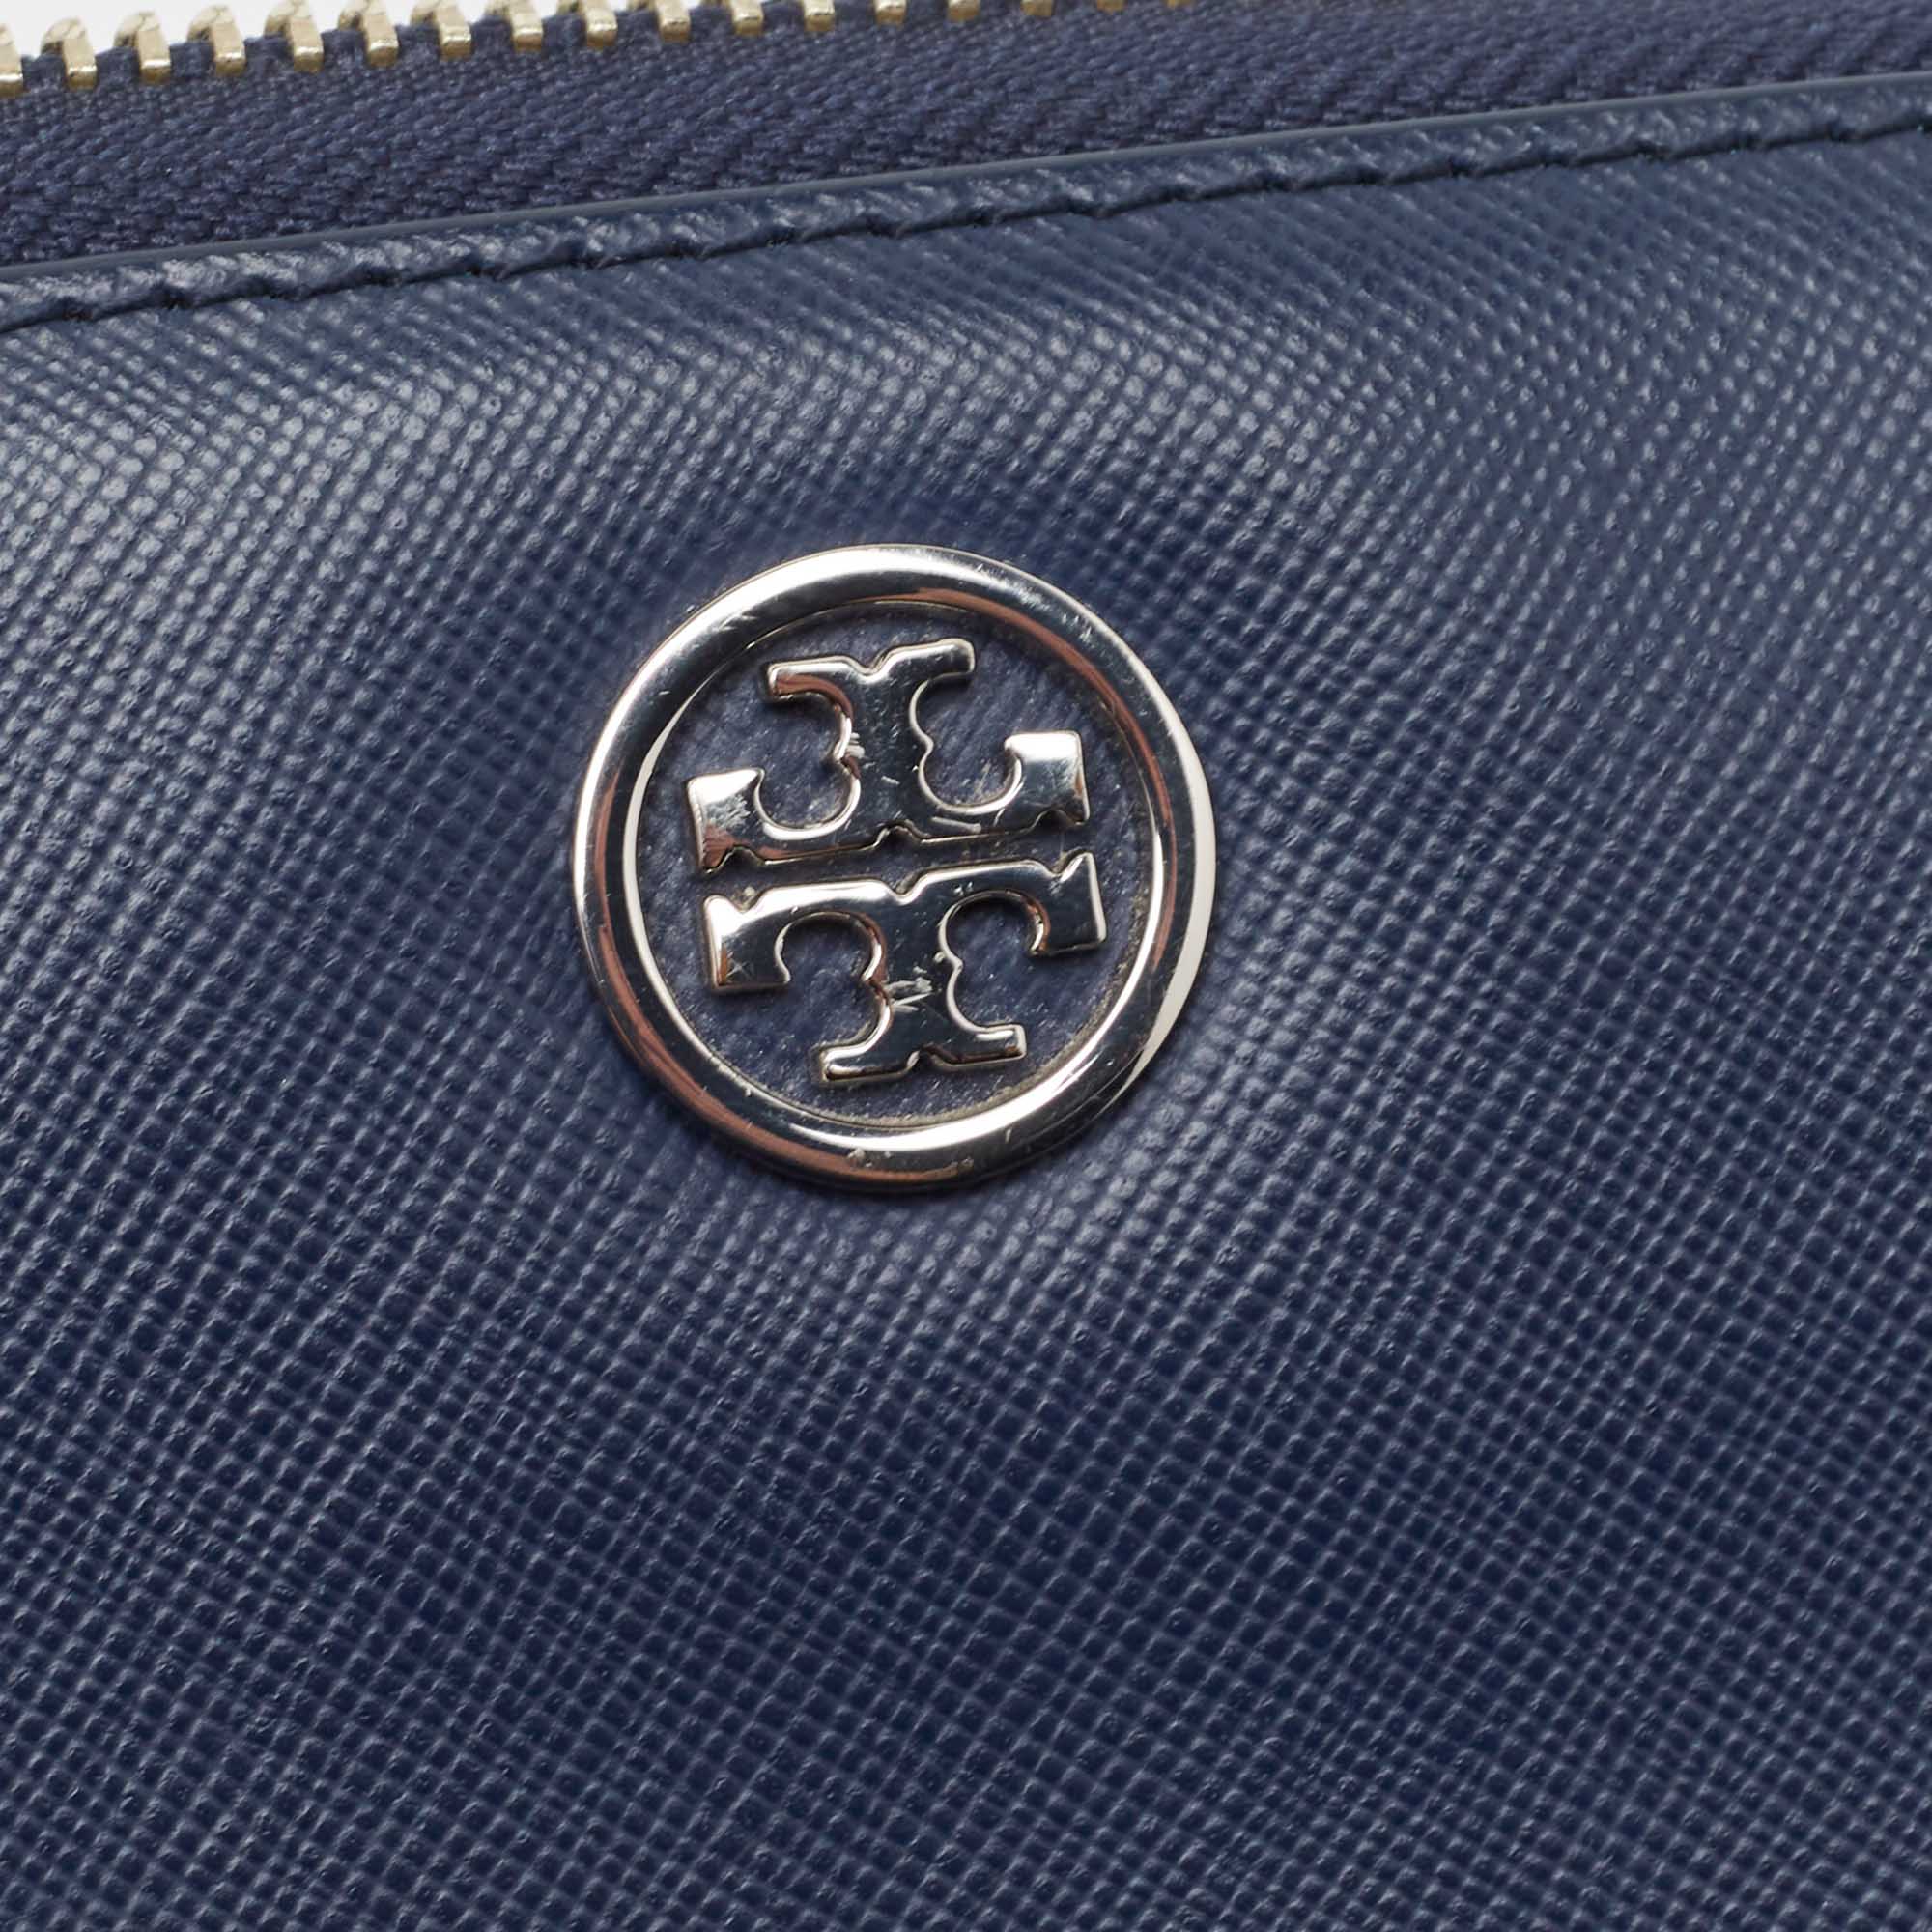 Tory Burch Blue Leather Robinson Zip Around Wallet